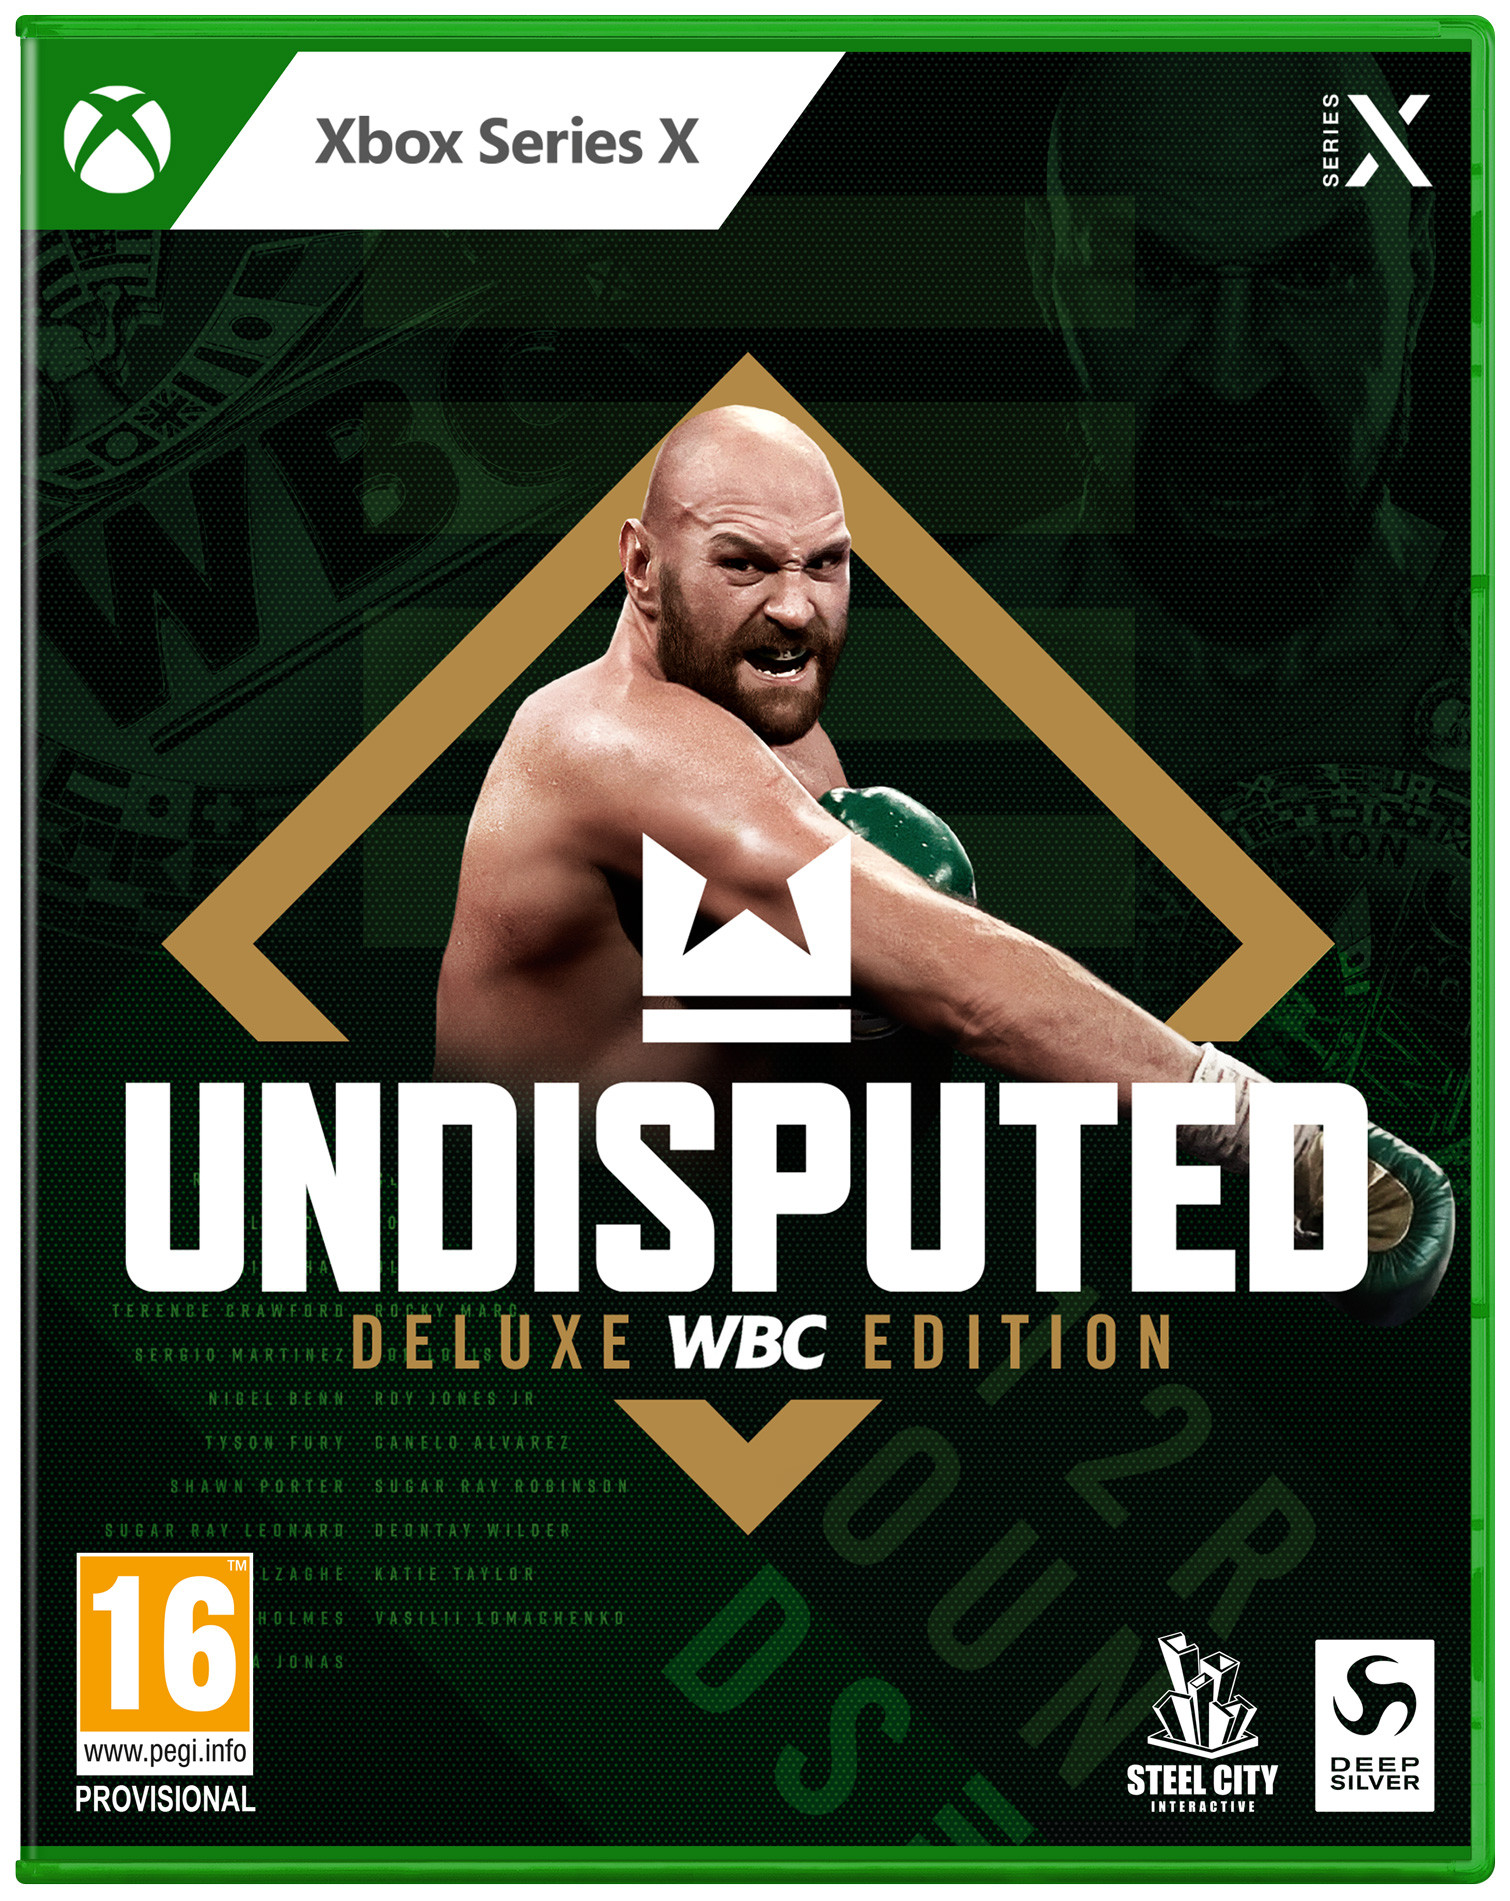 Undisputed - Deluxe WBC Edition (Xbox Series X), Steel City Interactive, Deep Silver